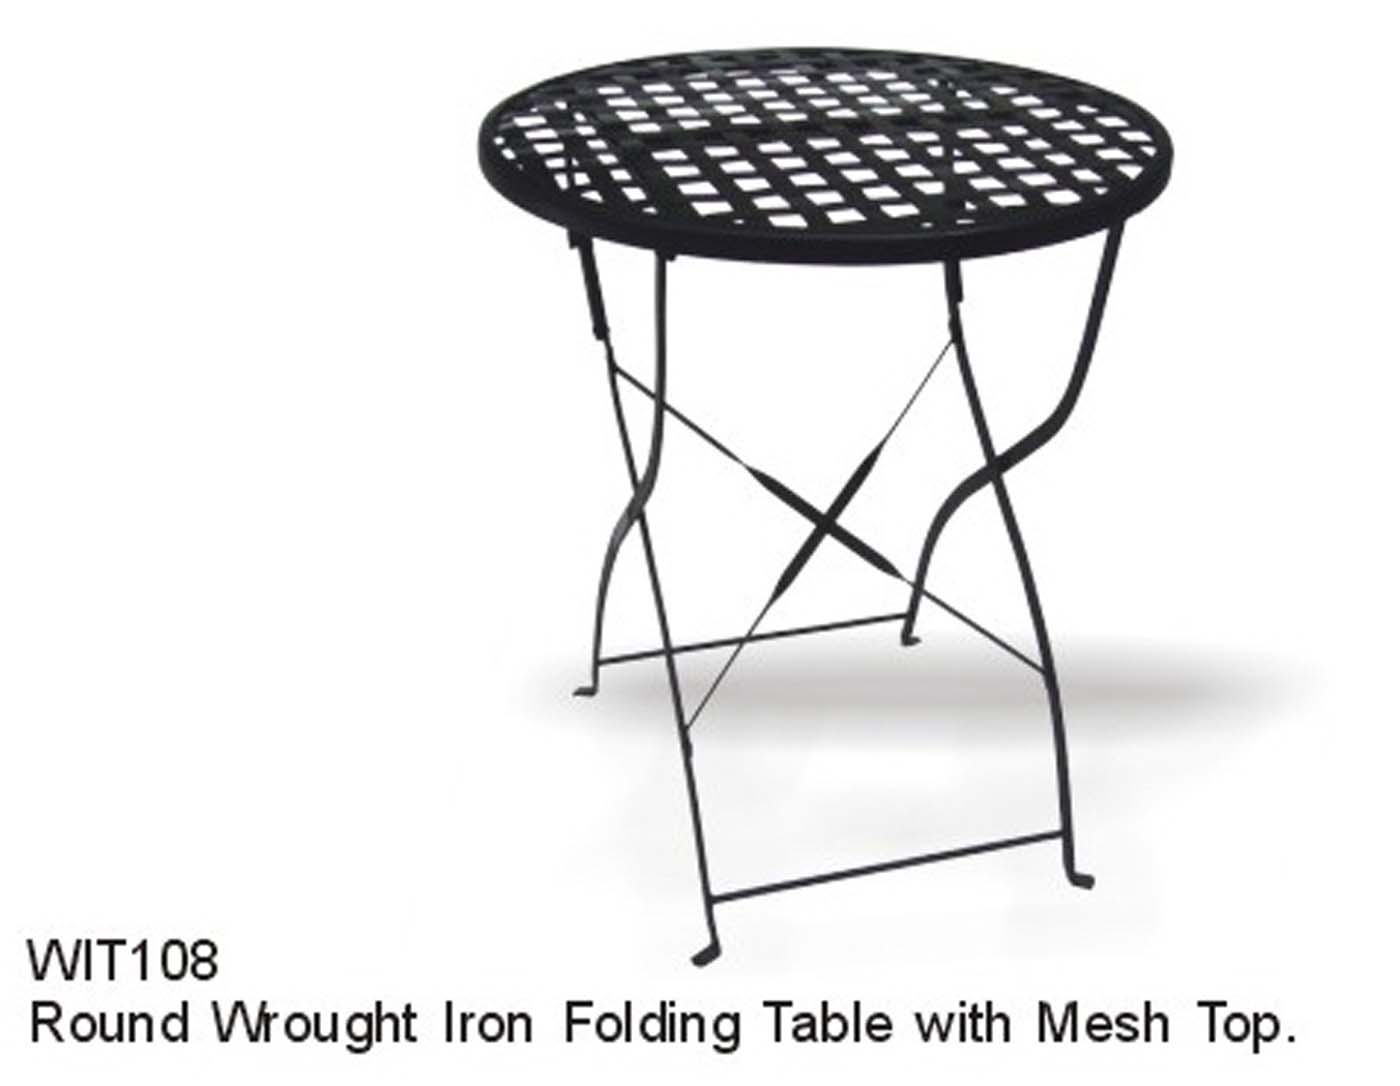 SOHO Round Wrought Iron Folding Table with Mesh top